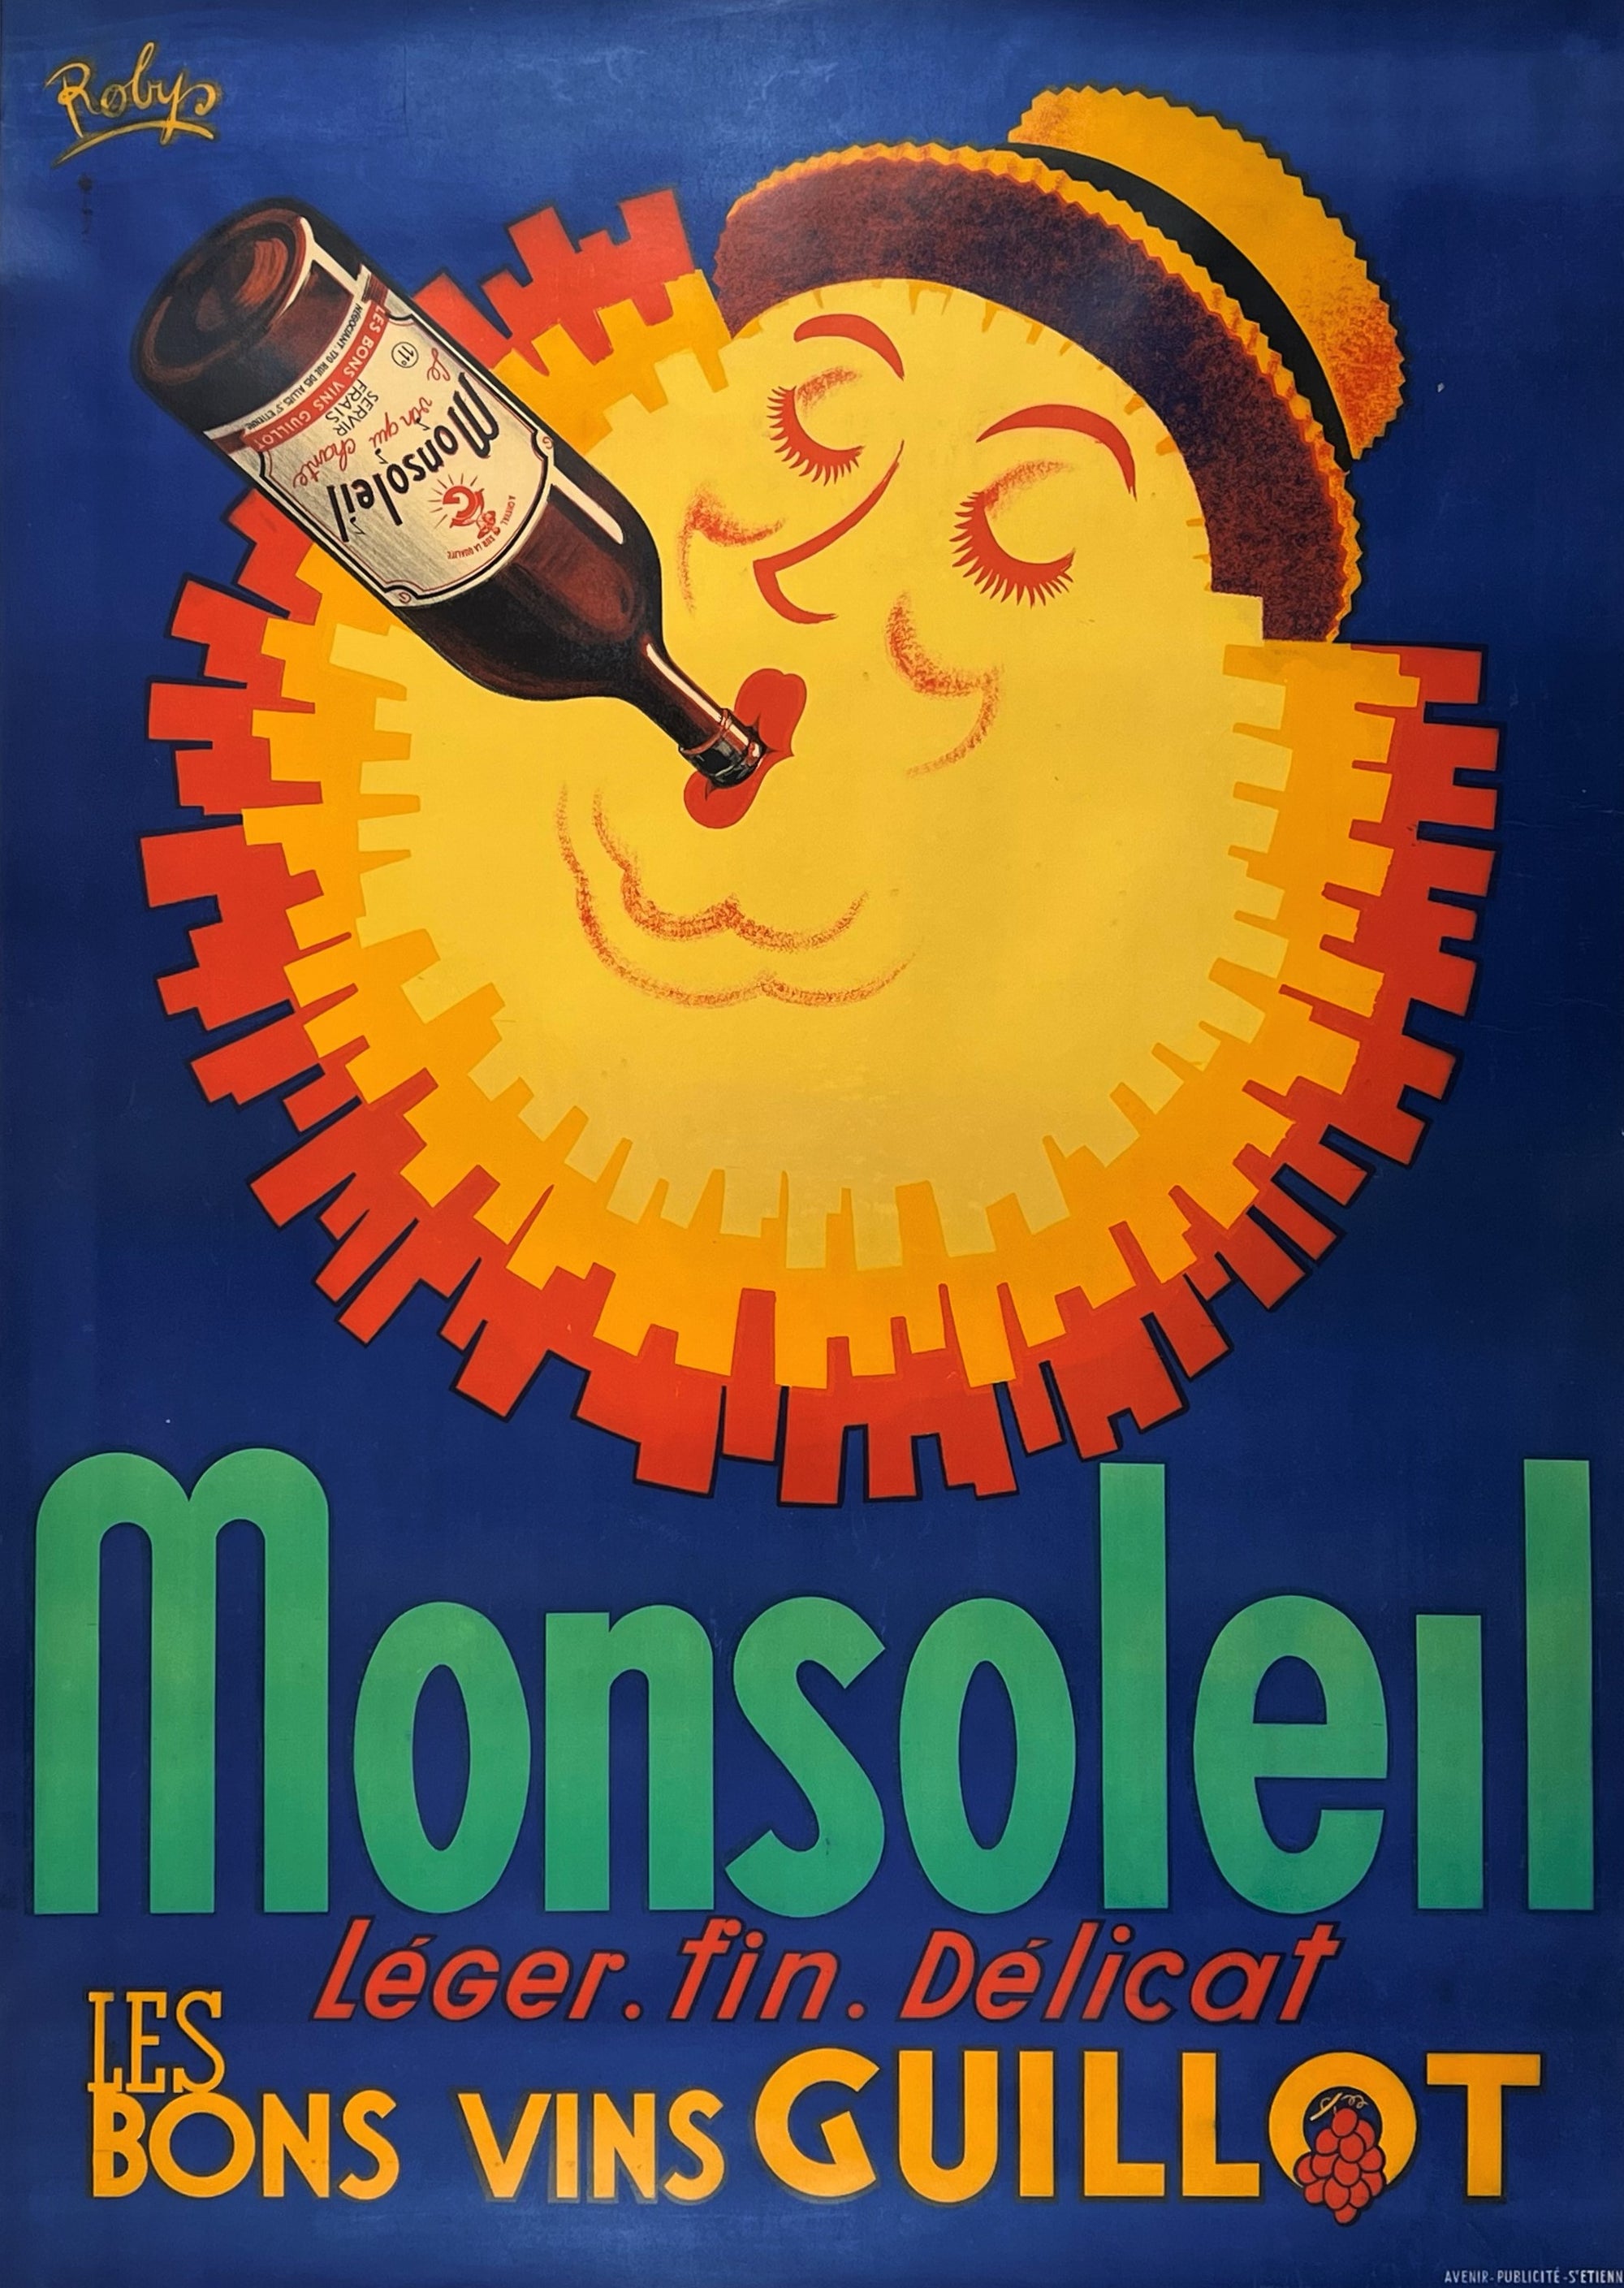 Monsoleil Wine by Robys - Authentic Vintage Poster